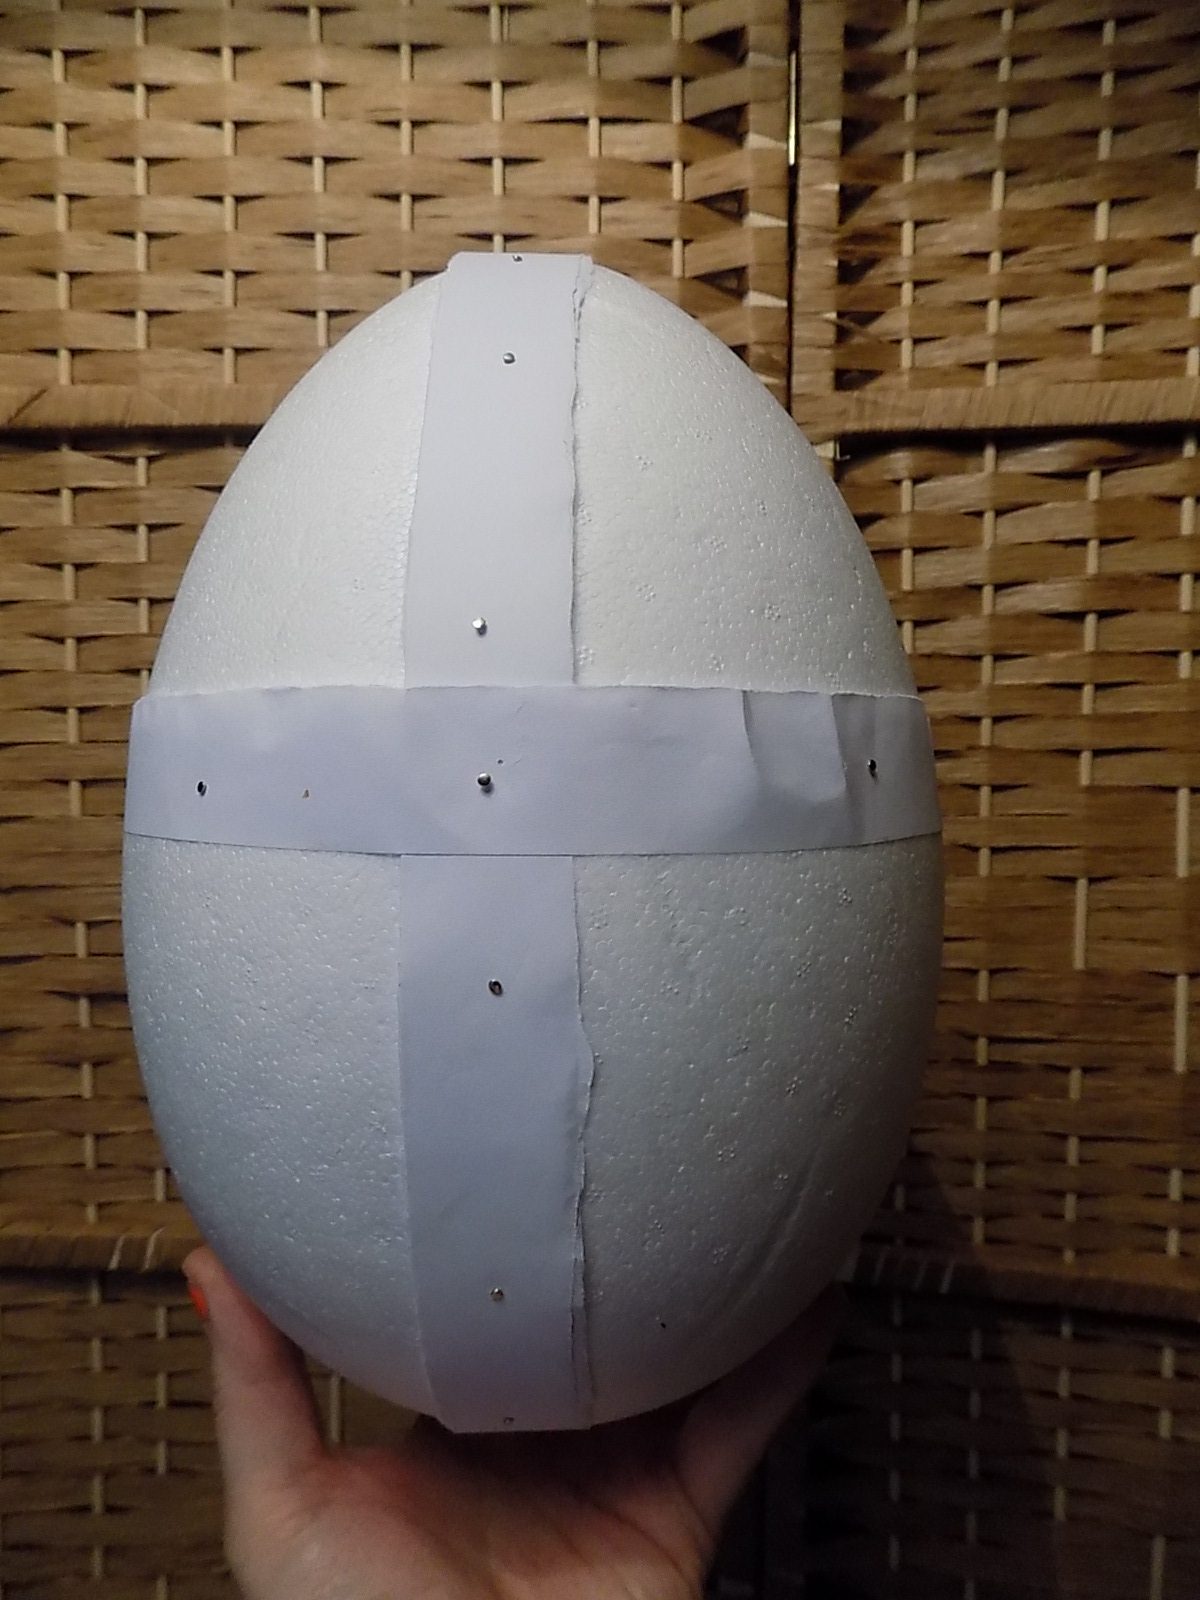 HOW TO CREATE A TEXTILE EASTER EGG